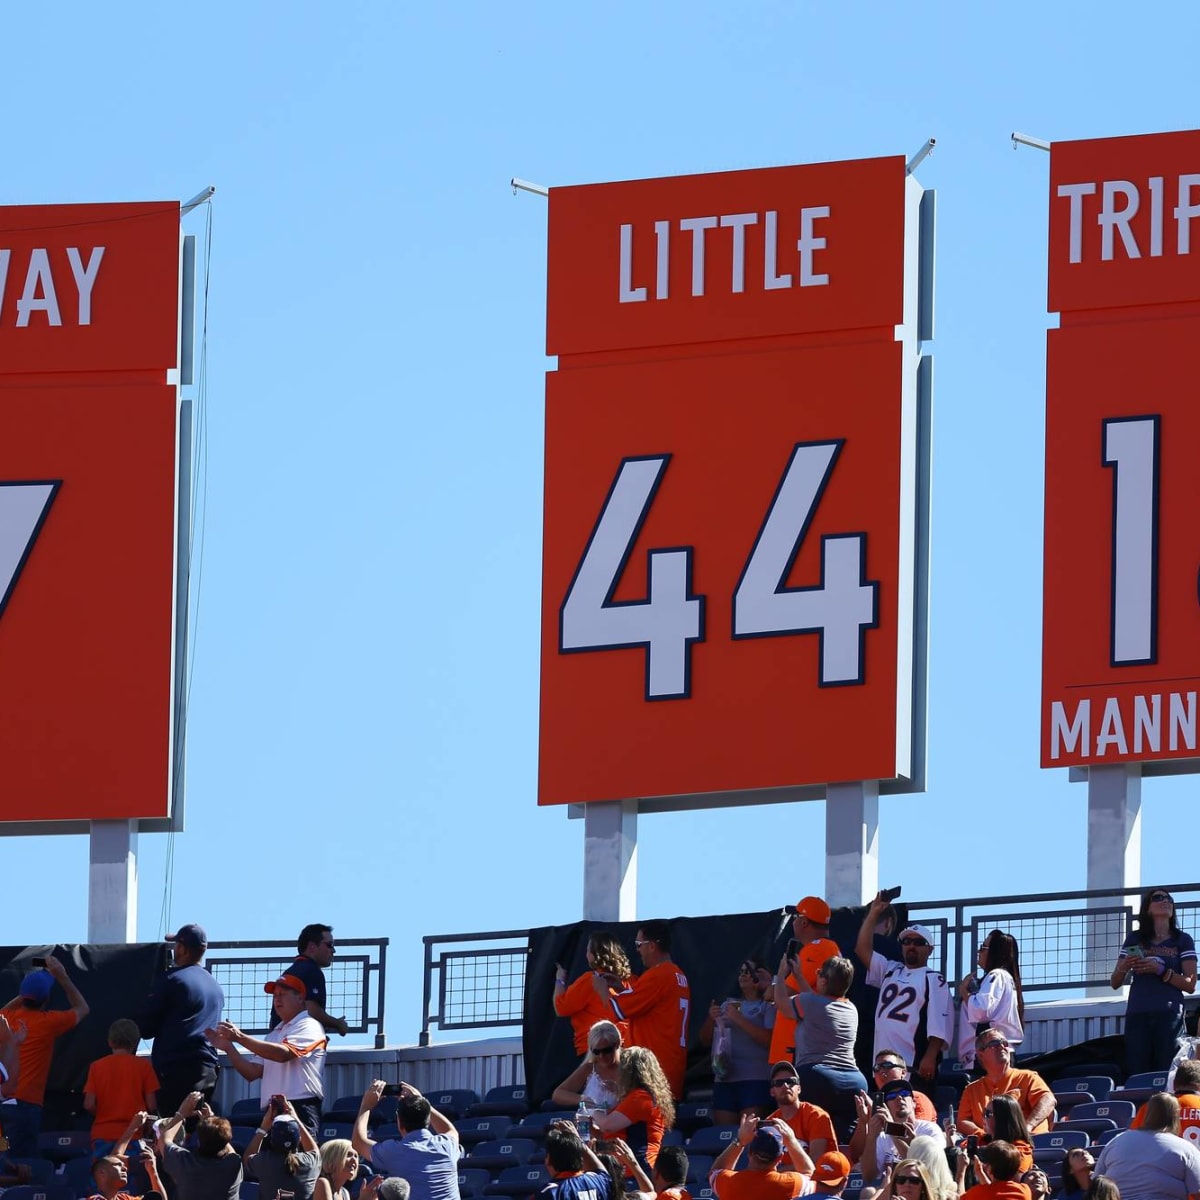 The next likely jersey retirement for every NFL team